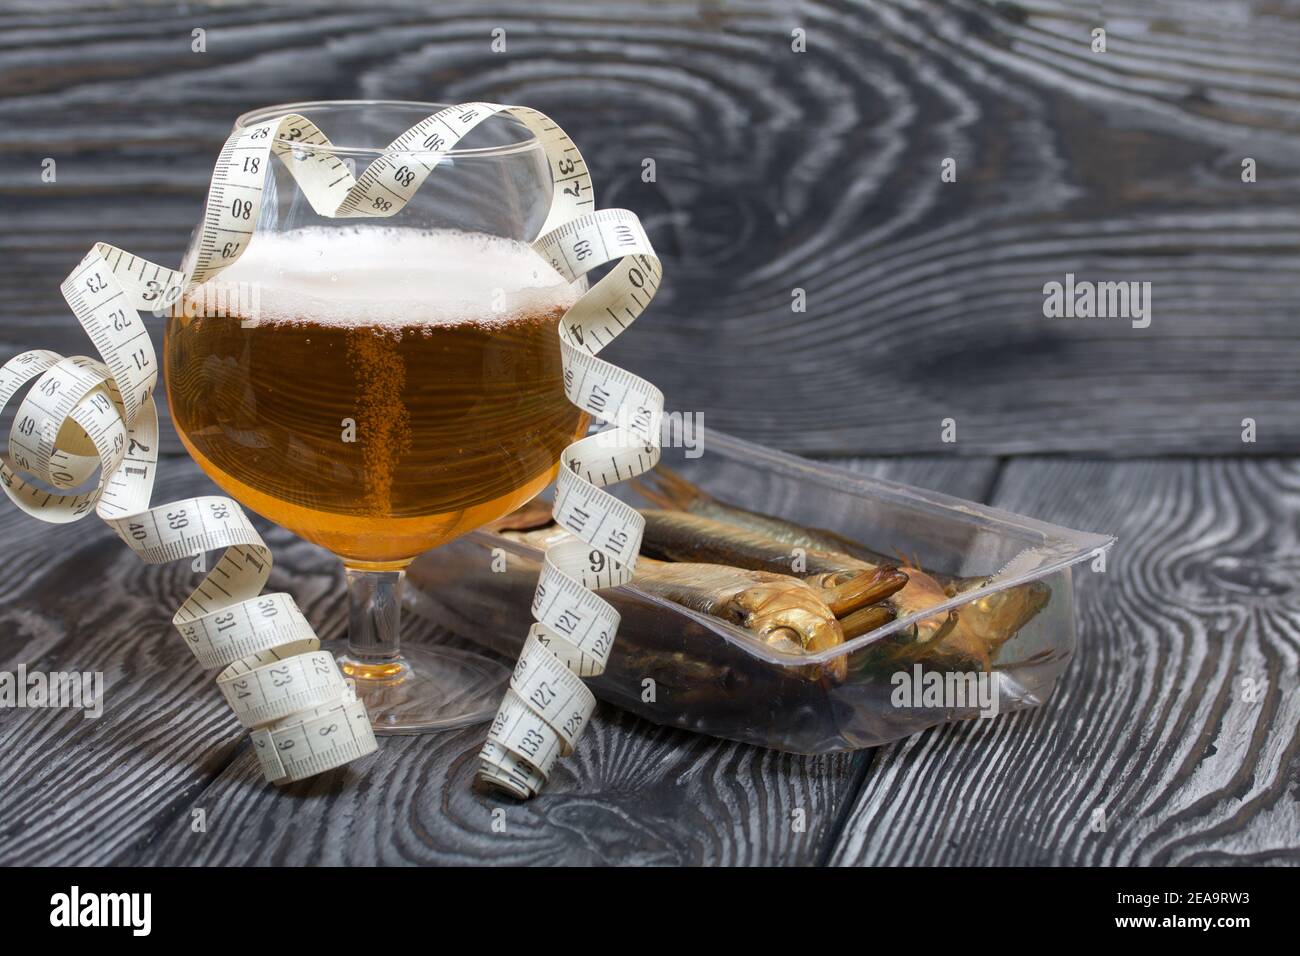 Beer in a glass and smoked fish. Nearby is a measuring tape. On pine boards.  A day without diets Stock Photo - Alamy